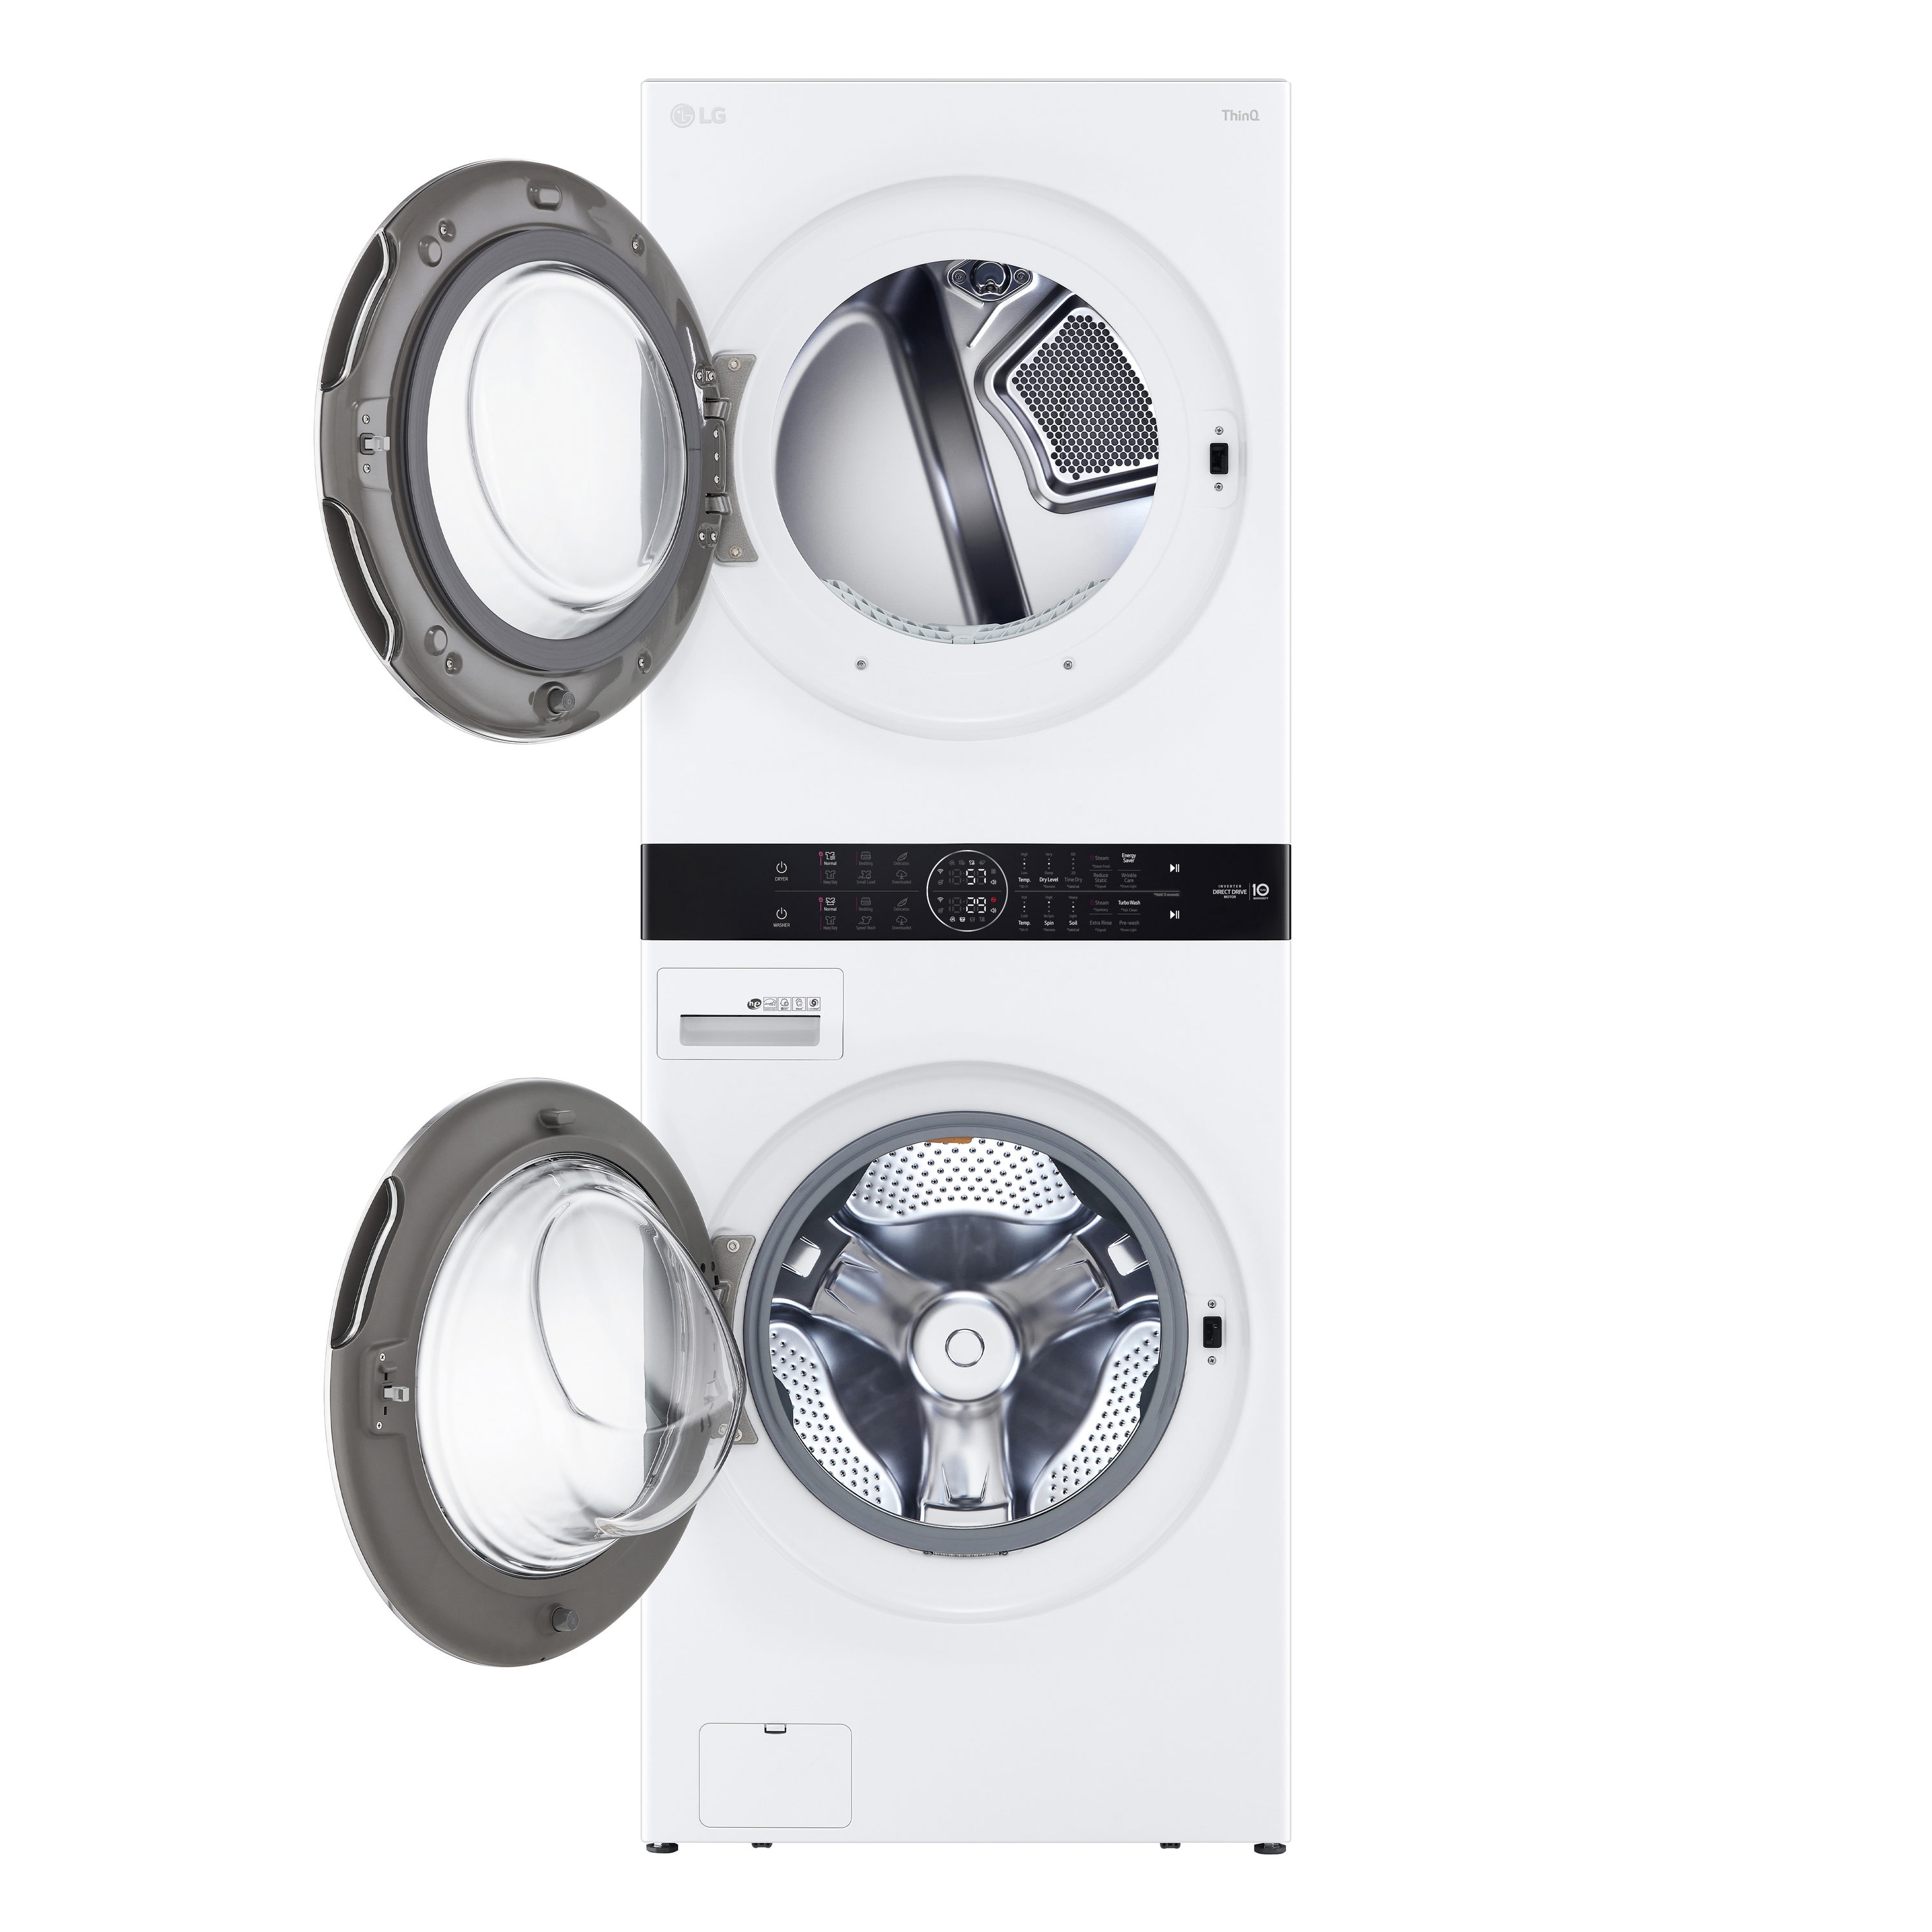 Shop LG Washtower White Styler with Single Steam Care Control at Center system Dryer Washer & Unit